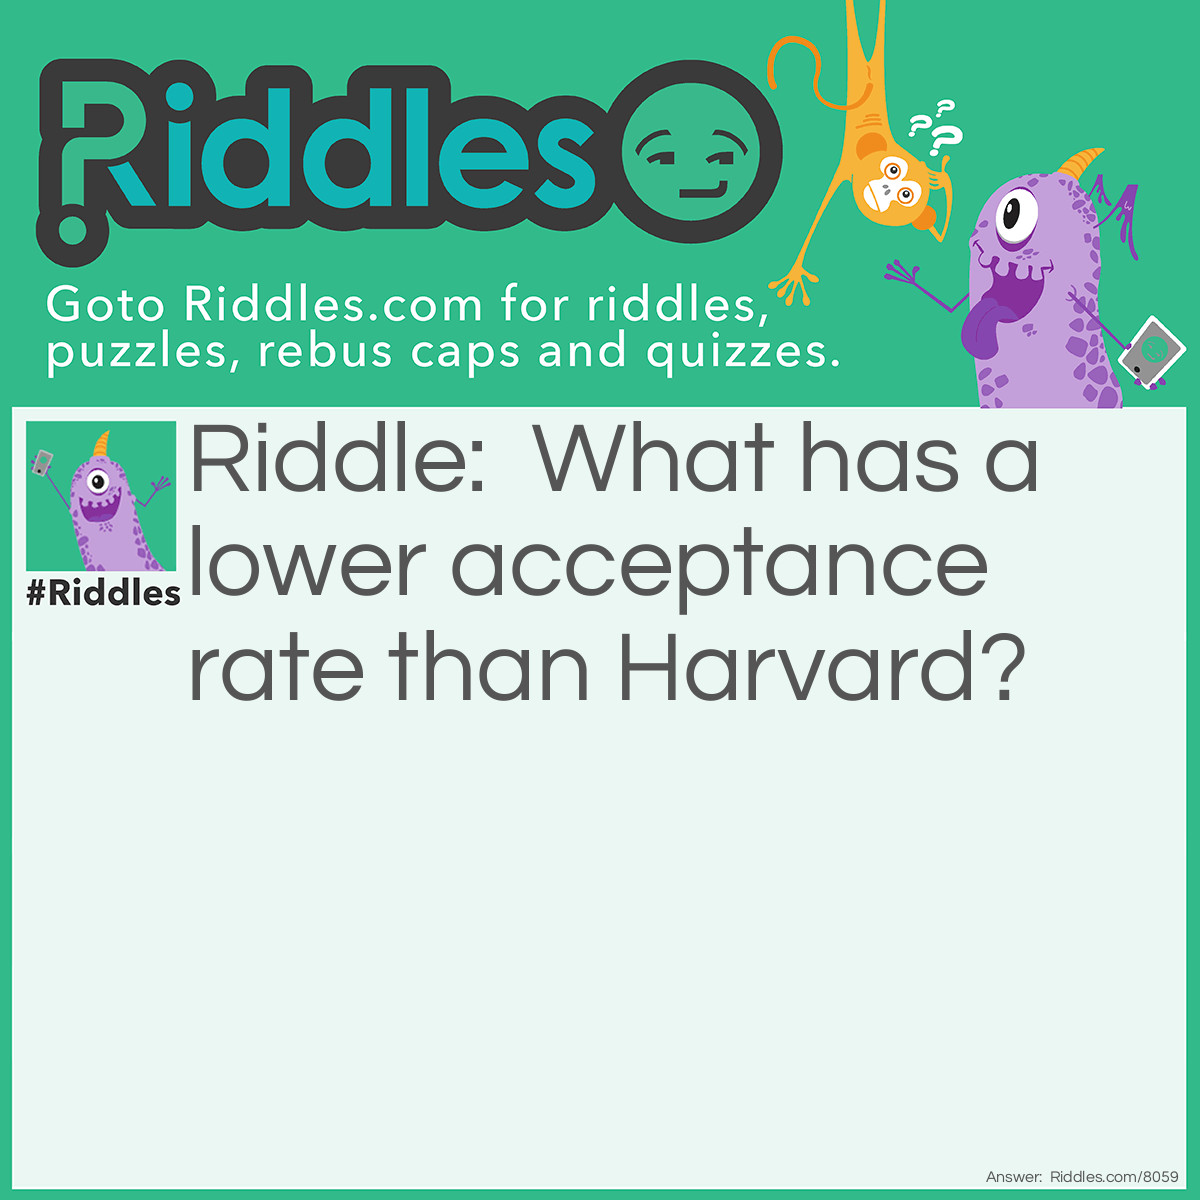 Riddle: What has a lower acceptance rate than Harvard? Answer: Walmart does because it only accepts 2.6% of applicants. But thats still a lot because there are so many stores.